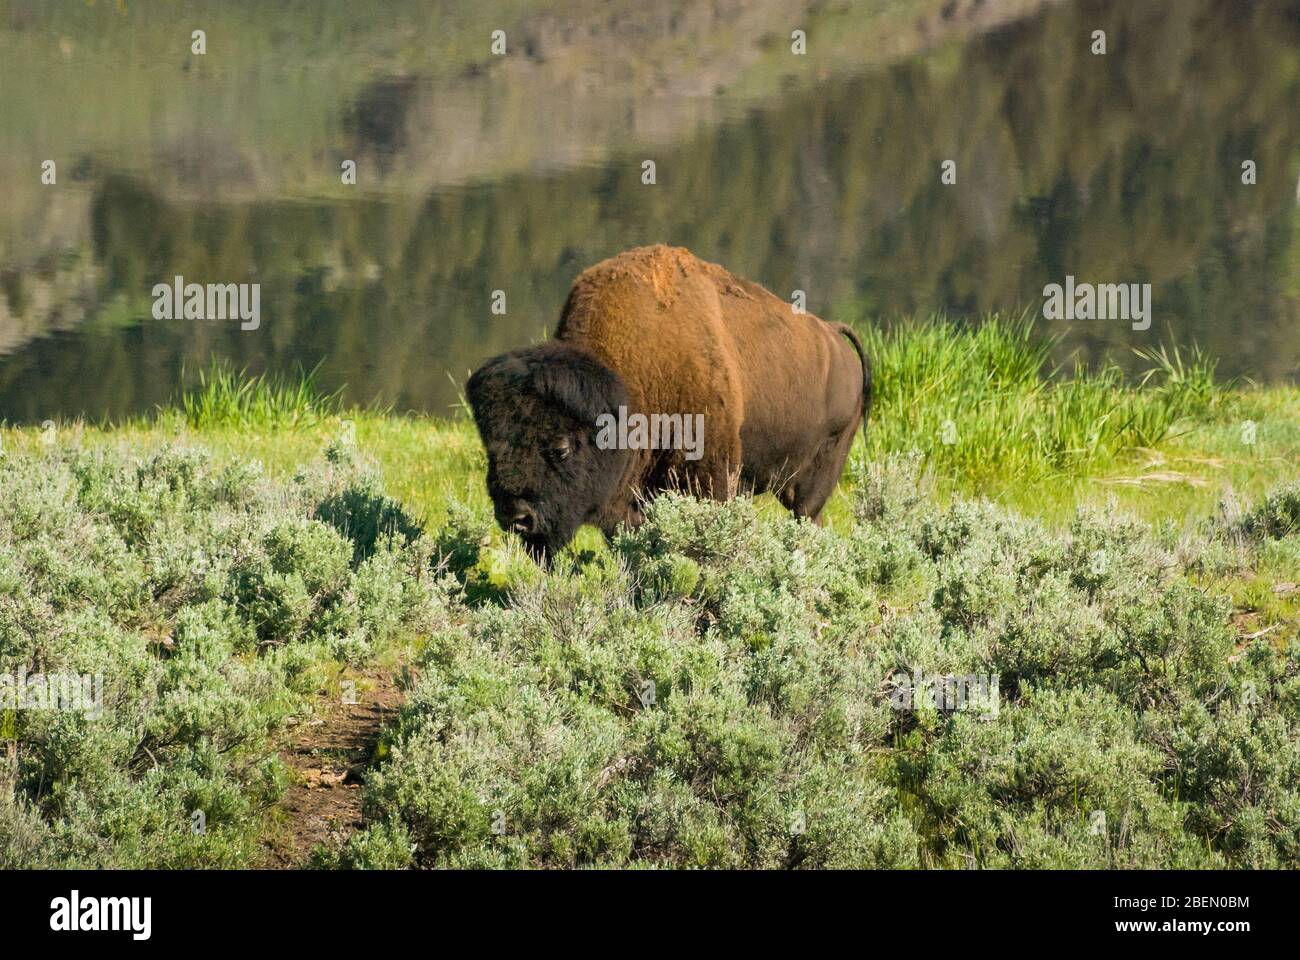 A single American Bison in the green scrub grasses of Yellowstone National Park Stock Photo